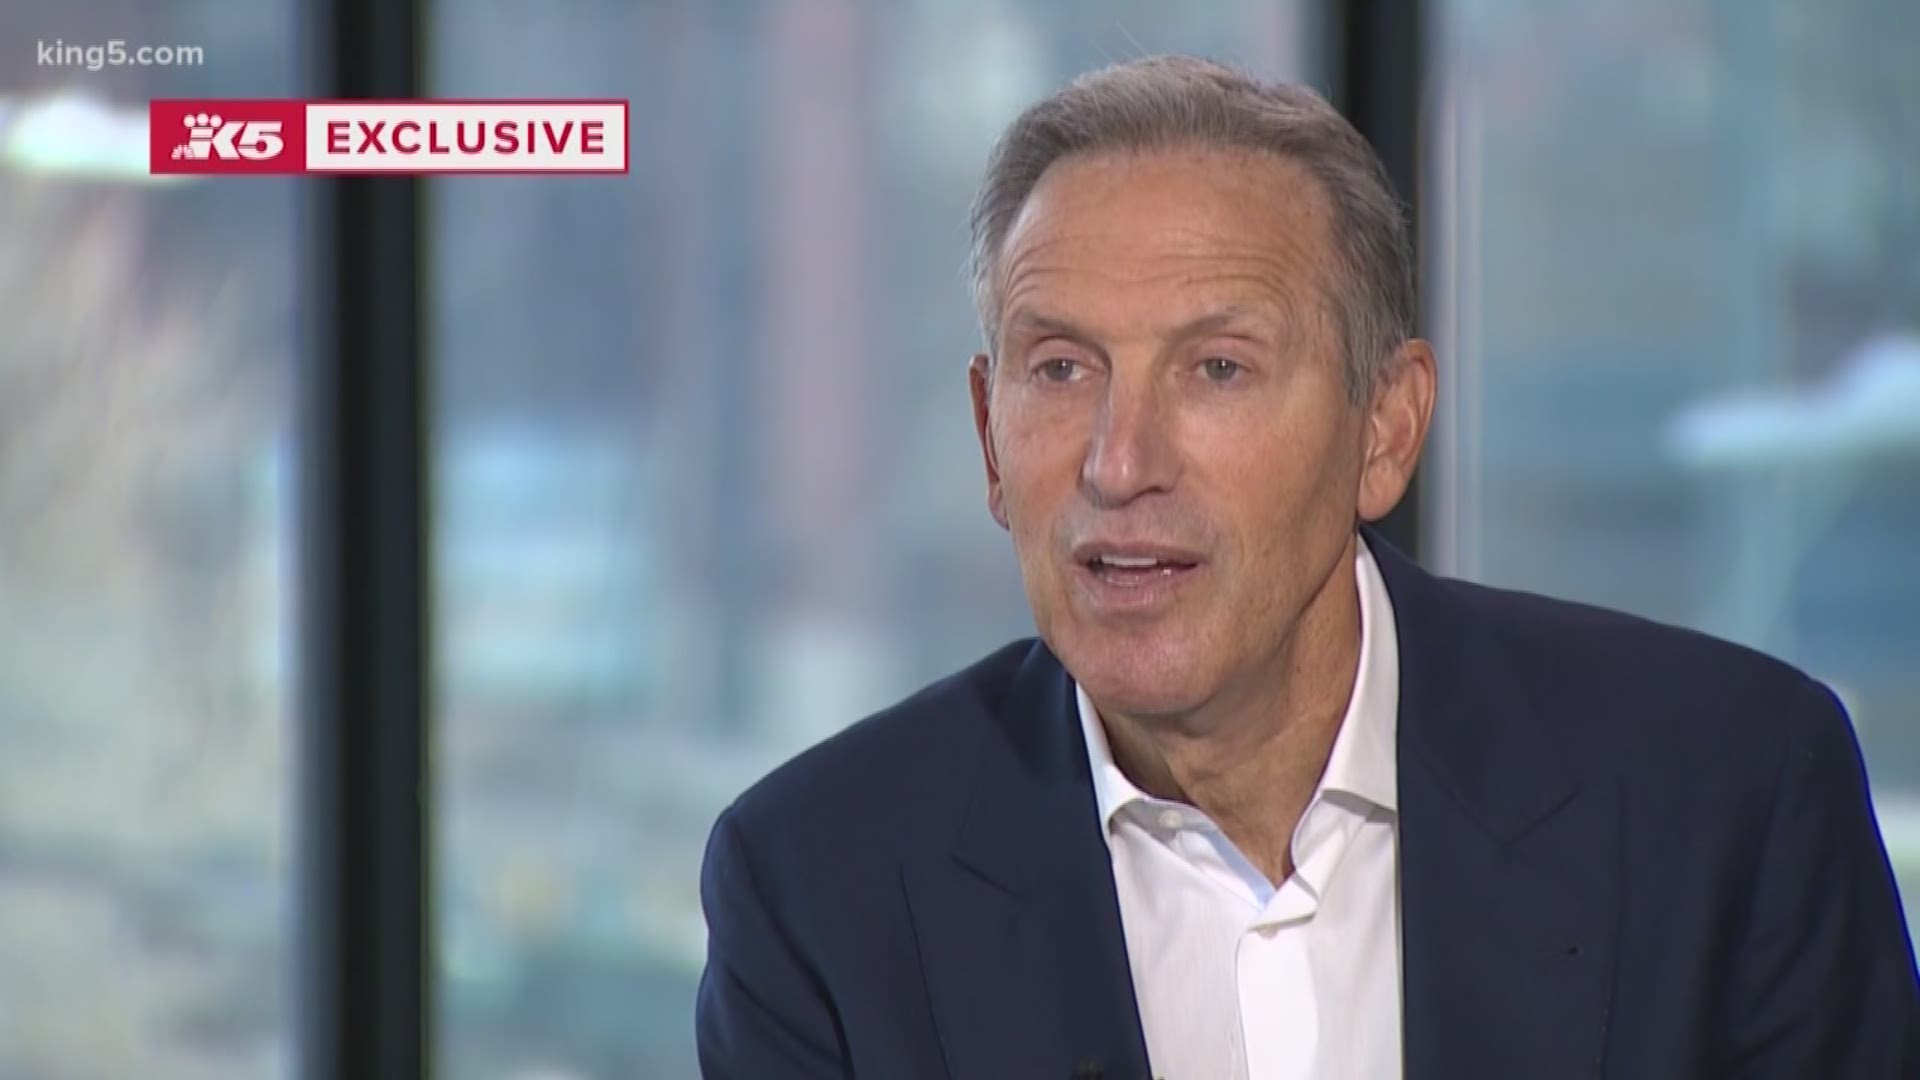 "It was a mistake." Howard Schultz is apologizing for selling the Sonics. He sits down for an exclusive one-on-one interview with KING 5's Alex Rozier.